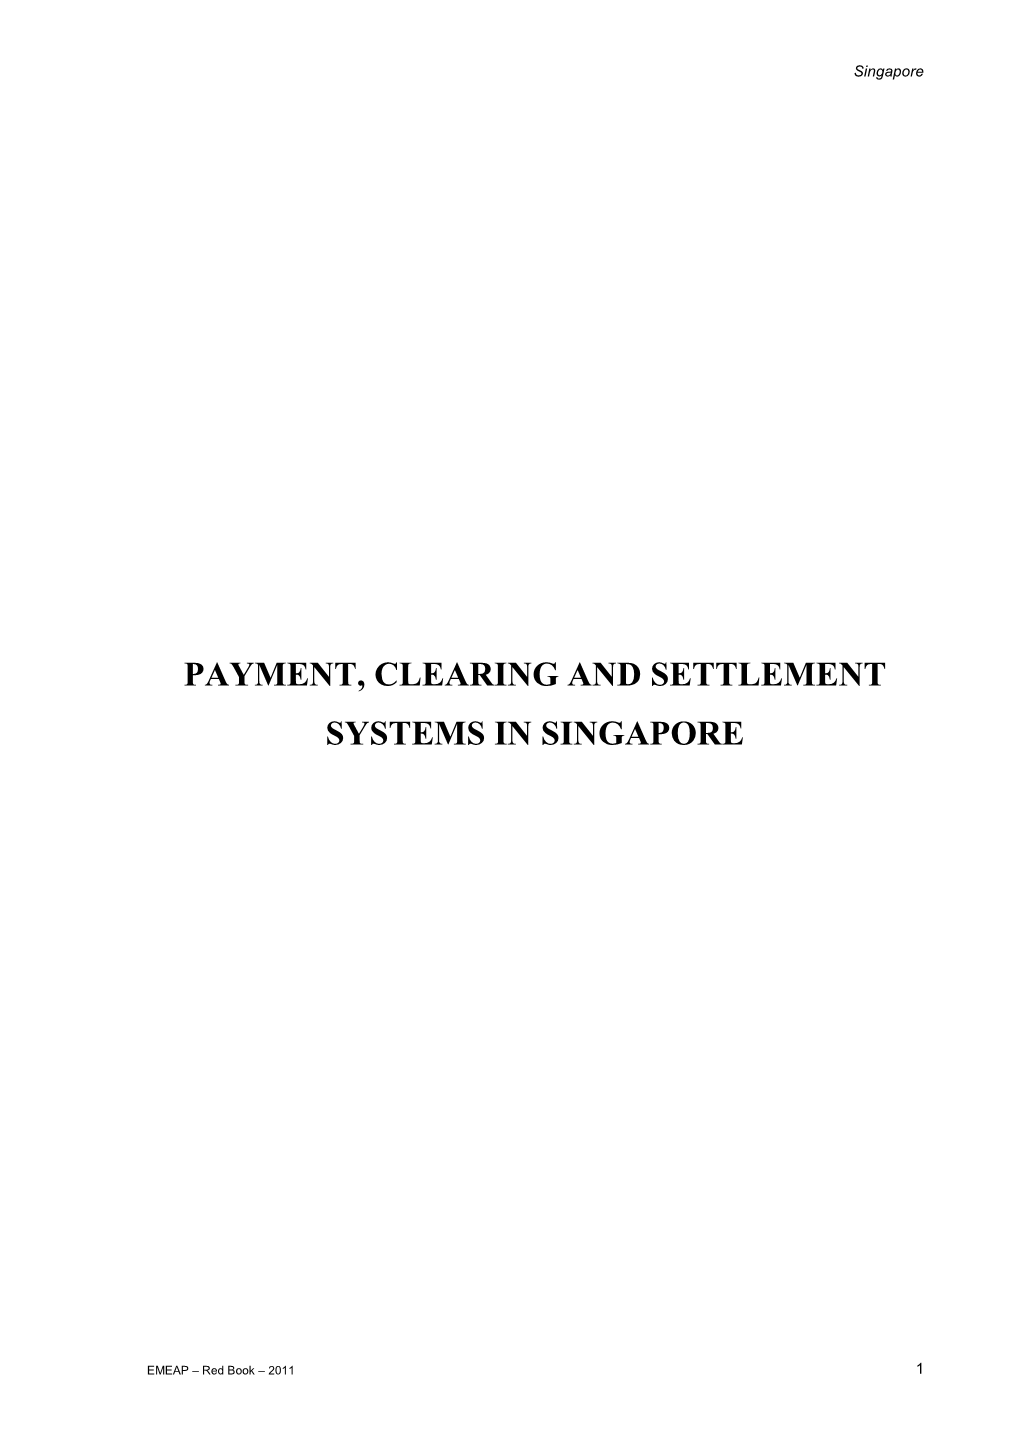 Payment, Clearing and Settlement Systems in Singapore